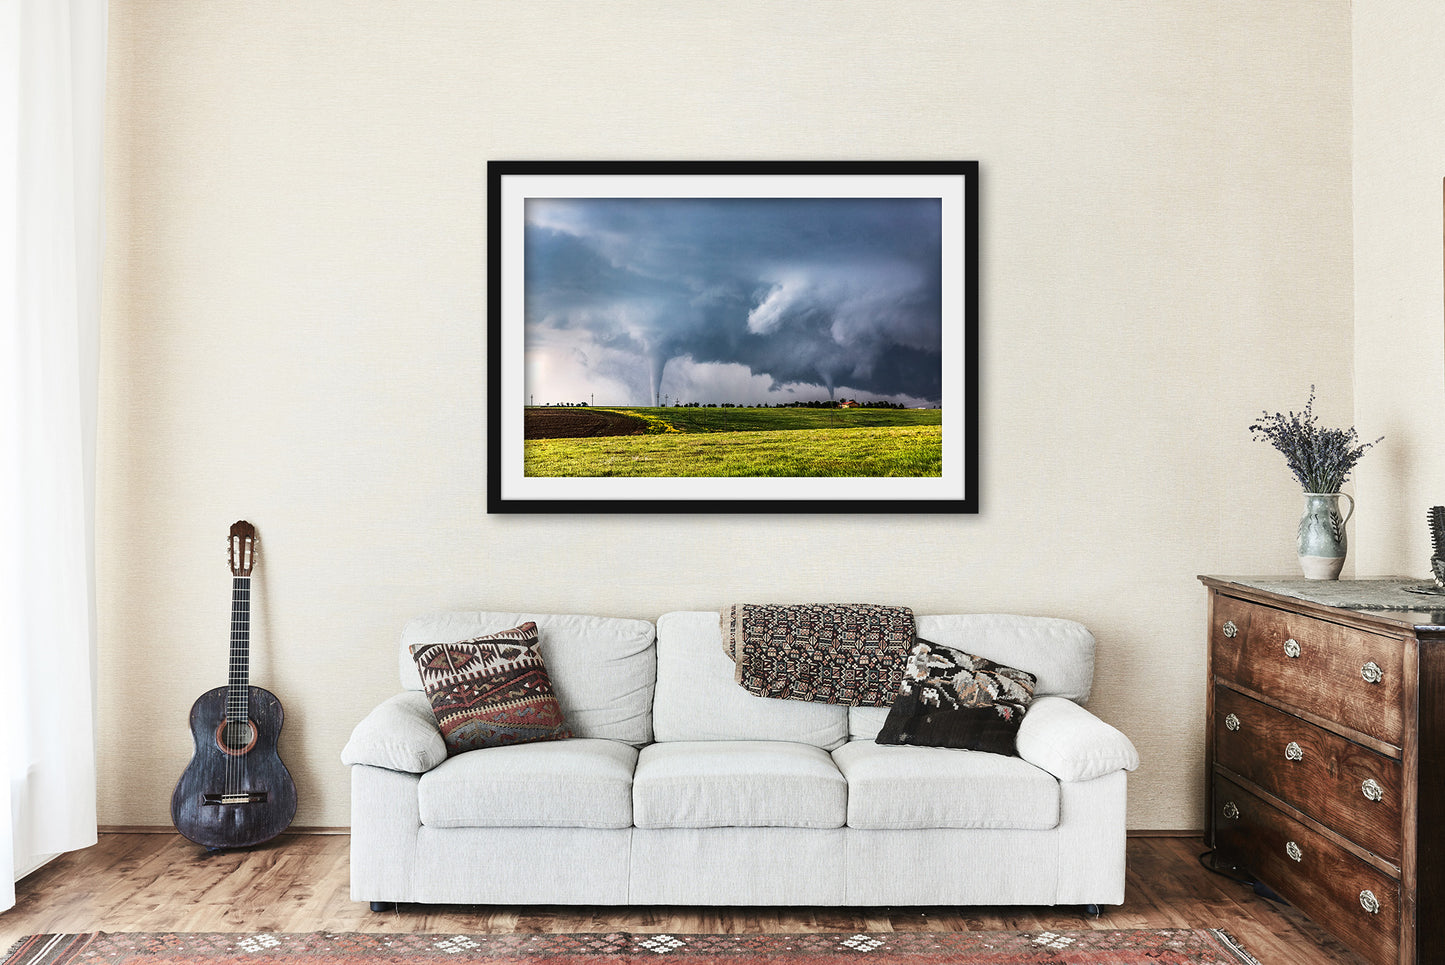 Storm Wall Art - Framed and Matted Print of Two Tornadoes on Stormy Spring Day in Kansas - Weather Photography Nature Artwork Decor